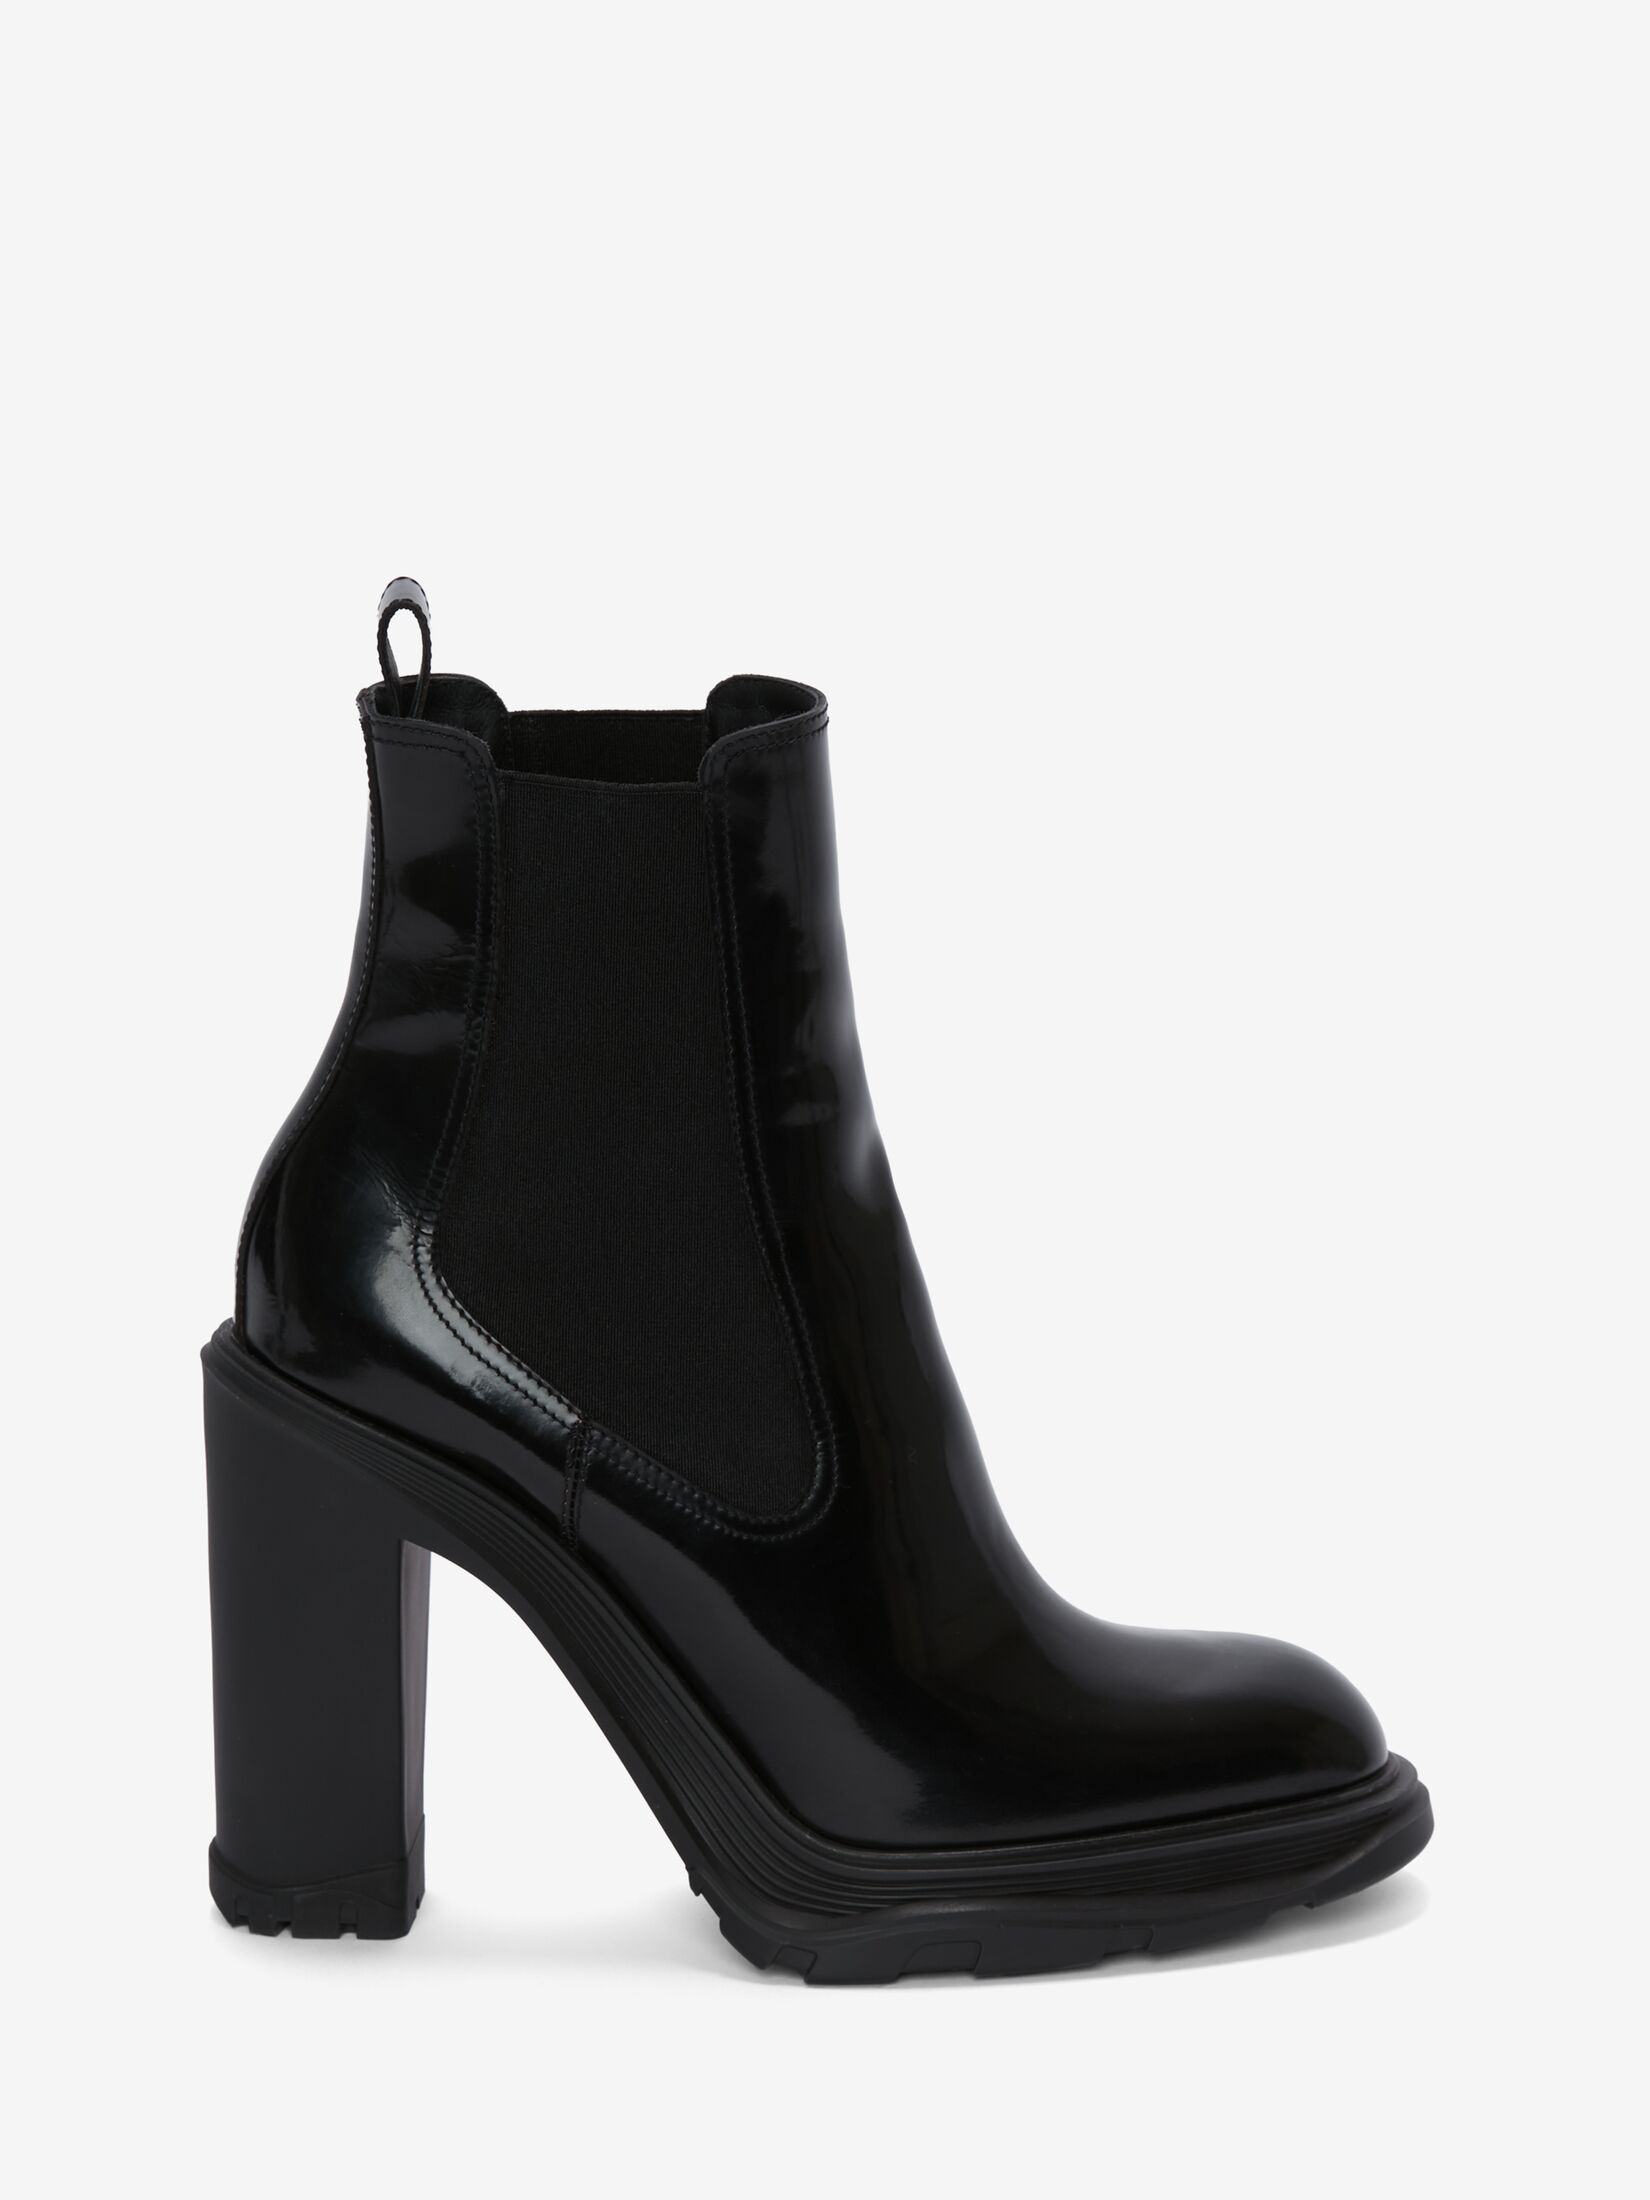 Women's Ankle Boots, Heeled & Chelsea Boots